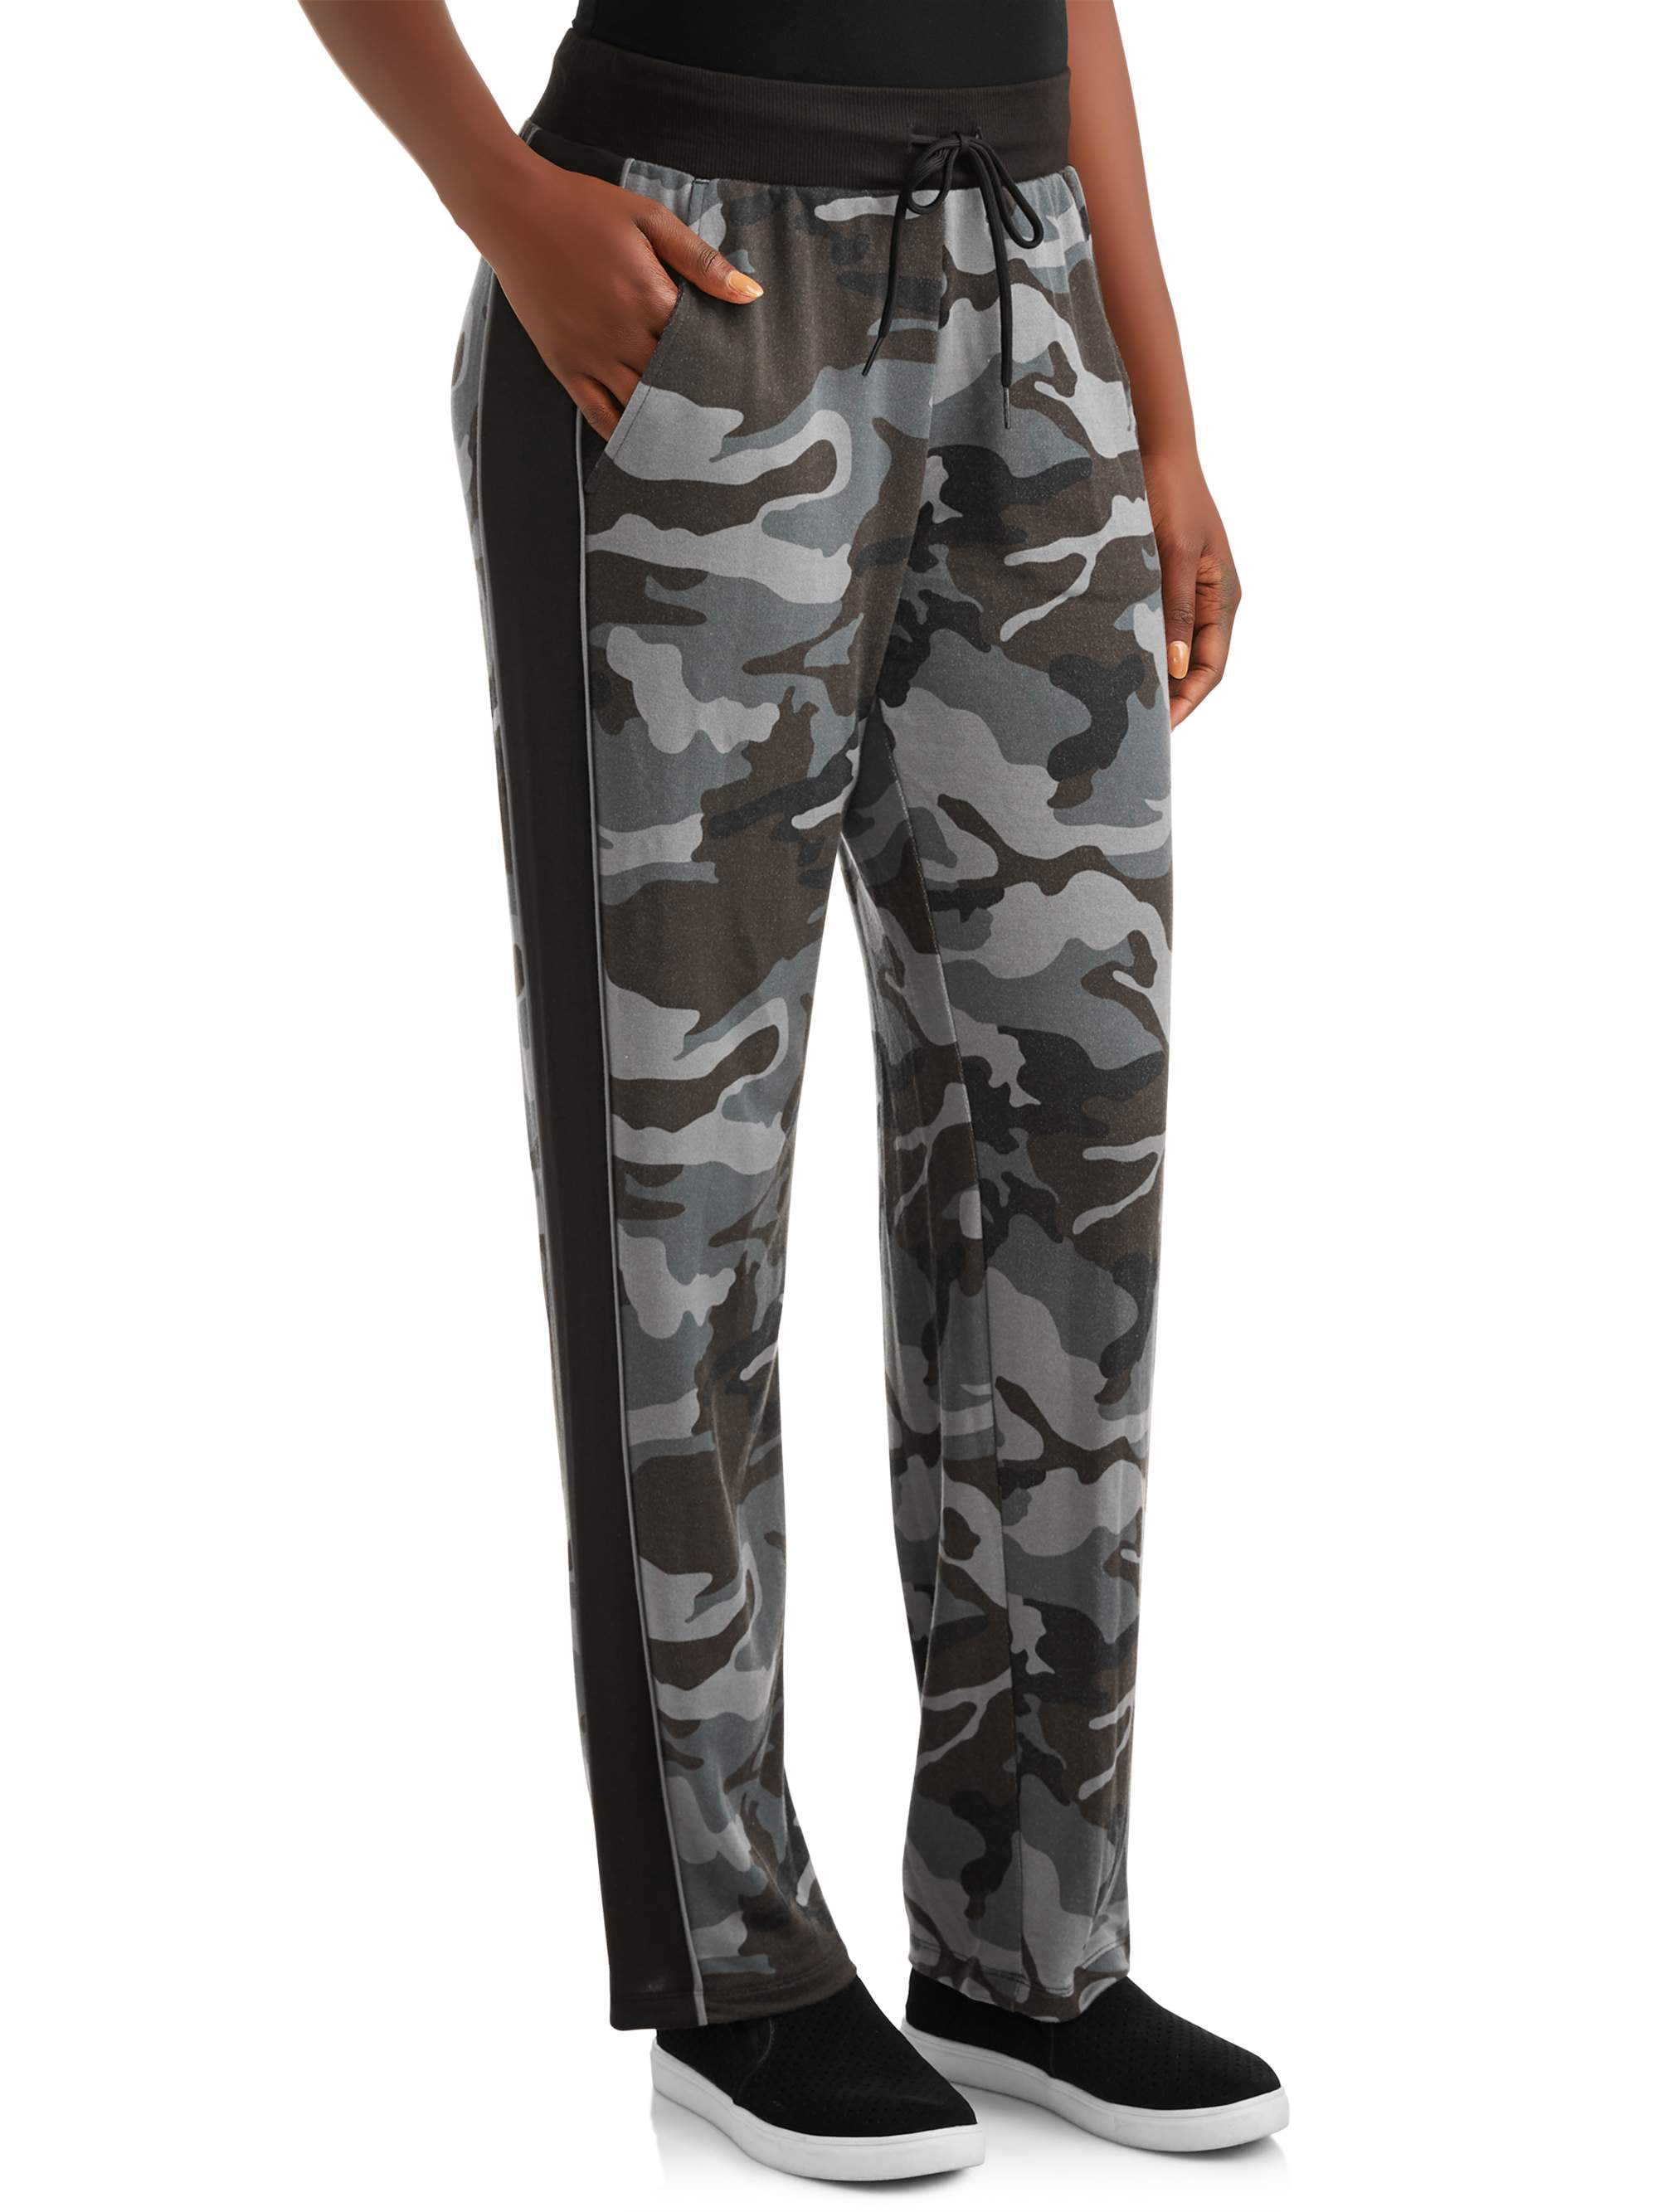 Athletic Works Women's Athleisure French Terry Camo Sweatpants ...